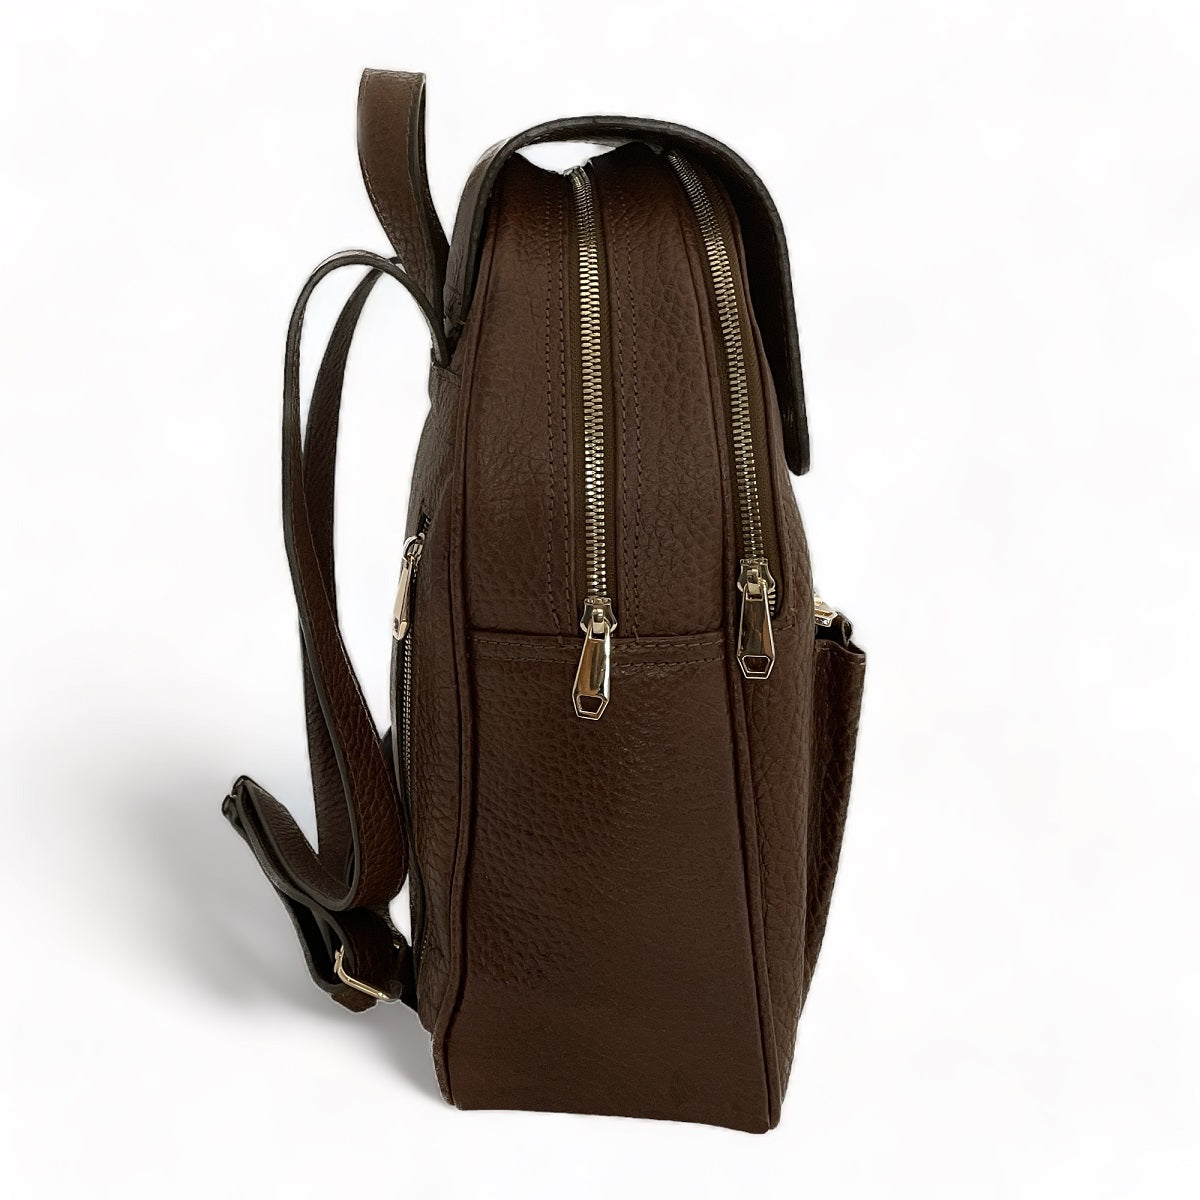 LeatherLuxe - Brown Leather Women's Backpack side